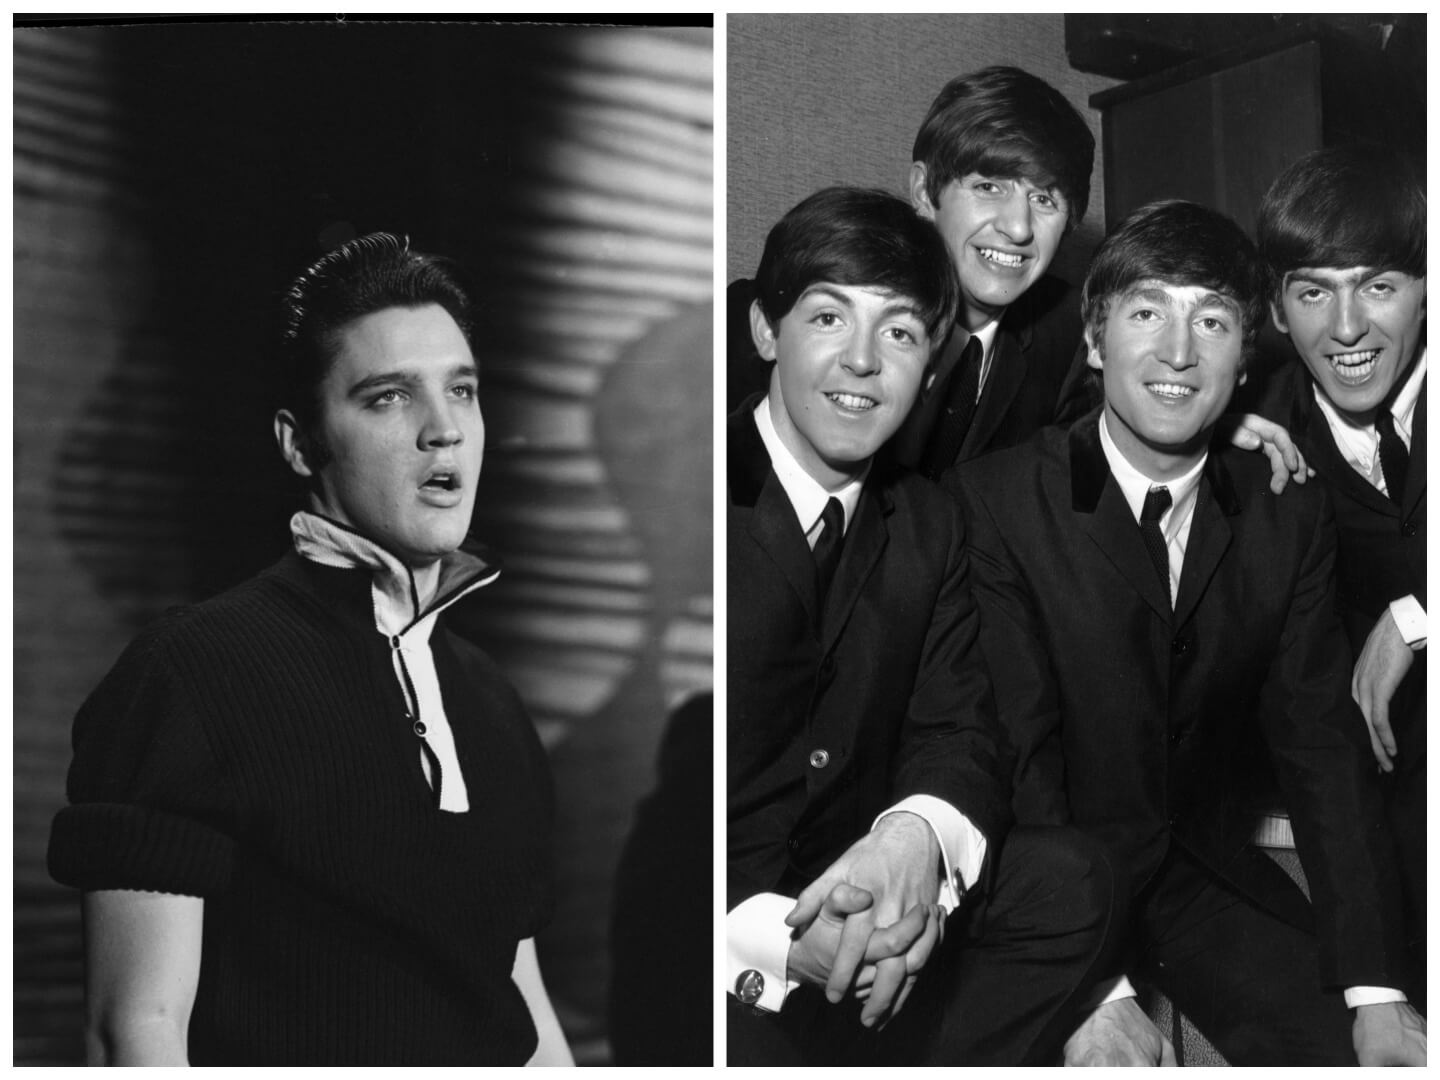 A black and white picture of Elvis wearing a collared shirt. The Beatles all wear suits and gather together.